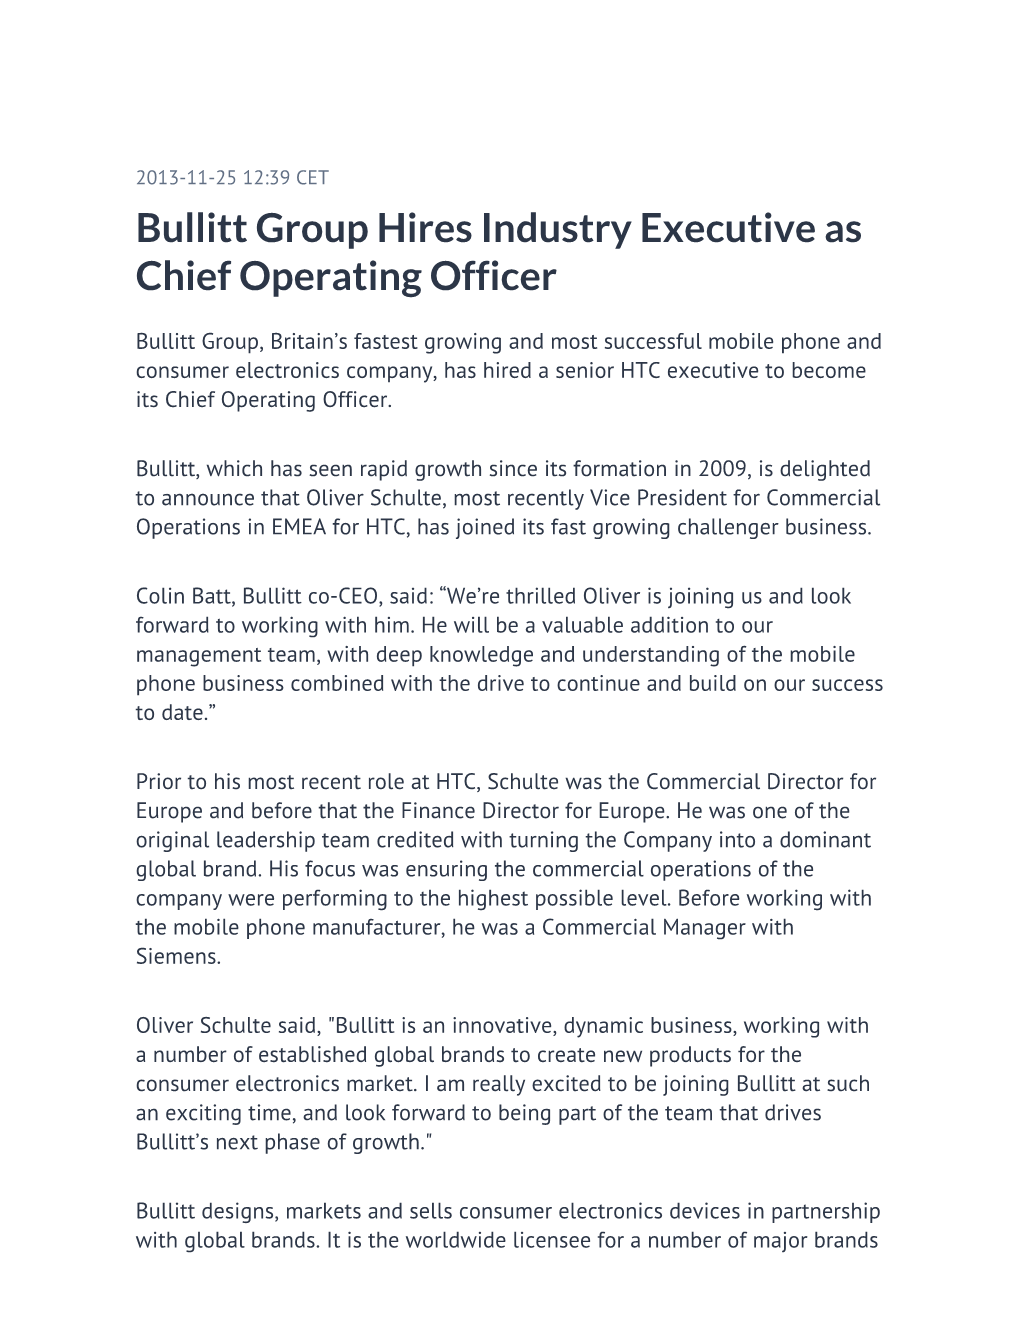 Bullitt Group Hires Industry Executive As Chief Operating Officer